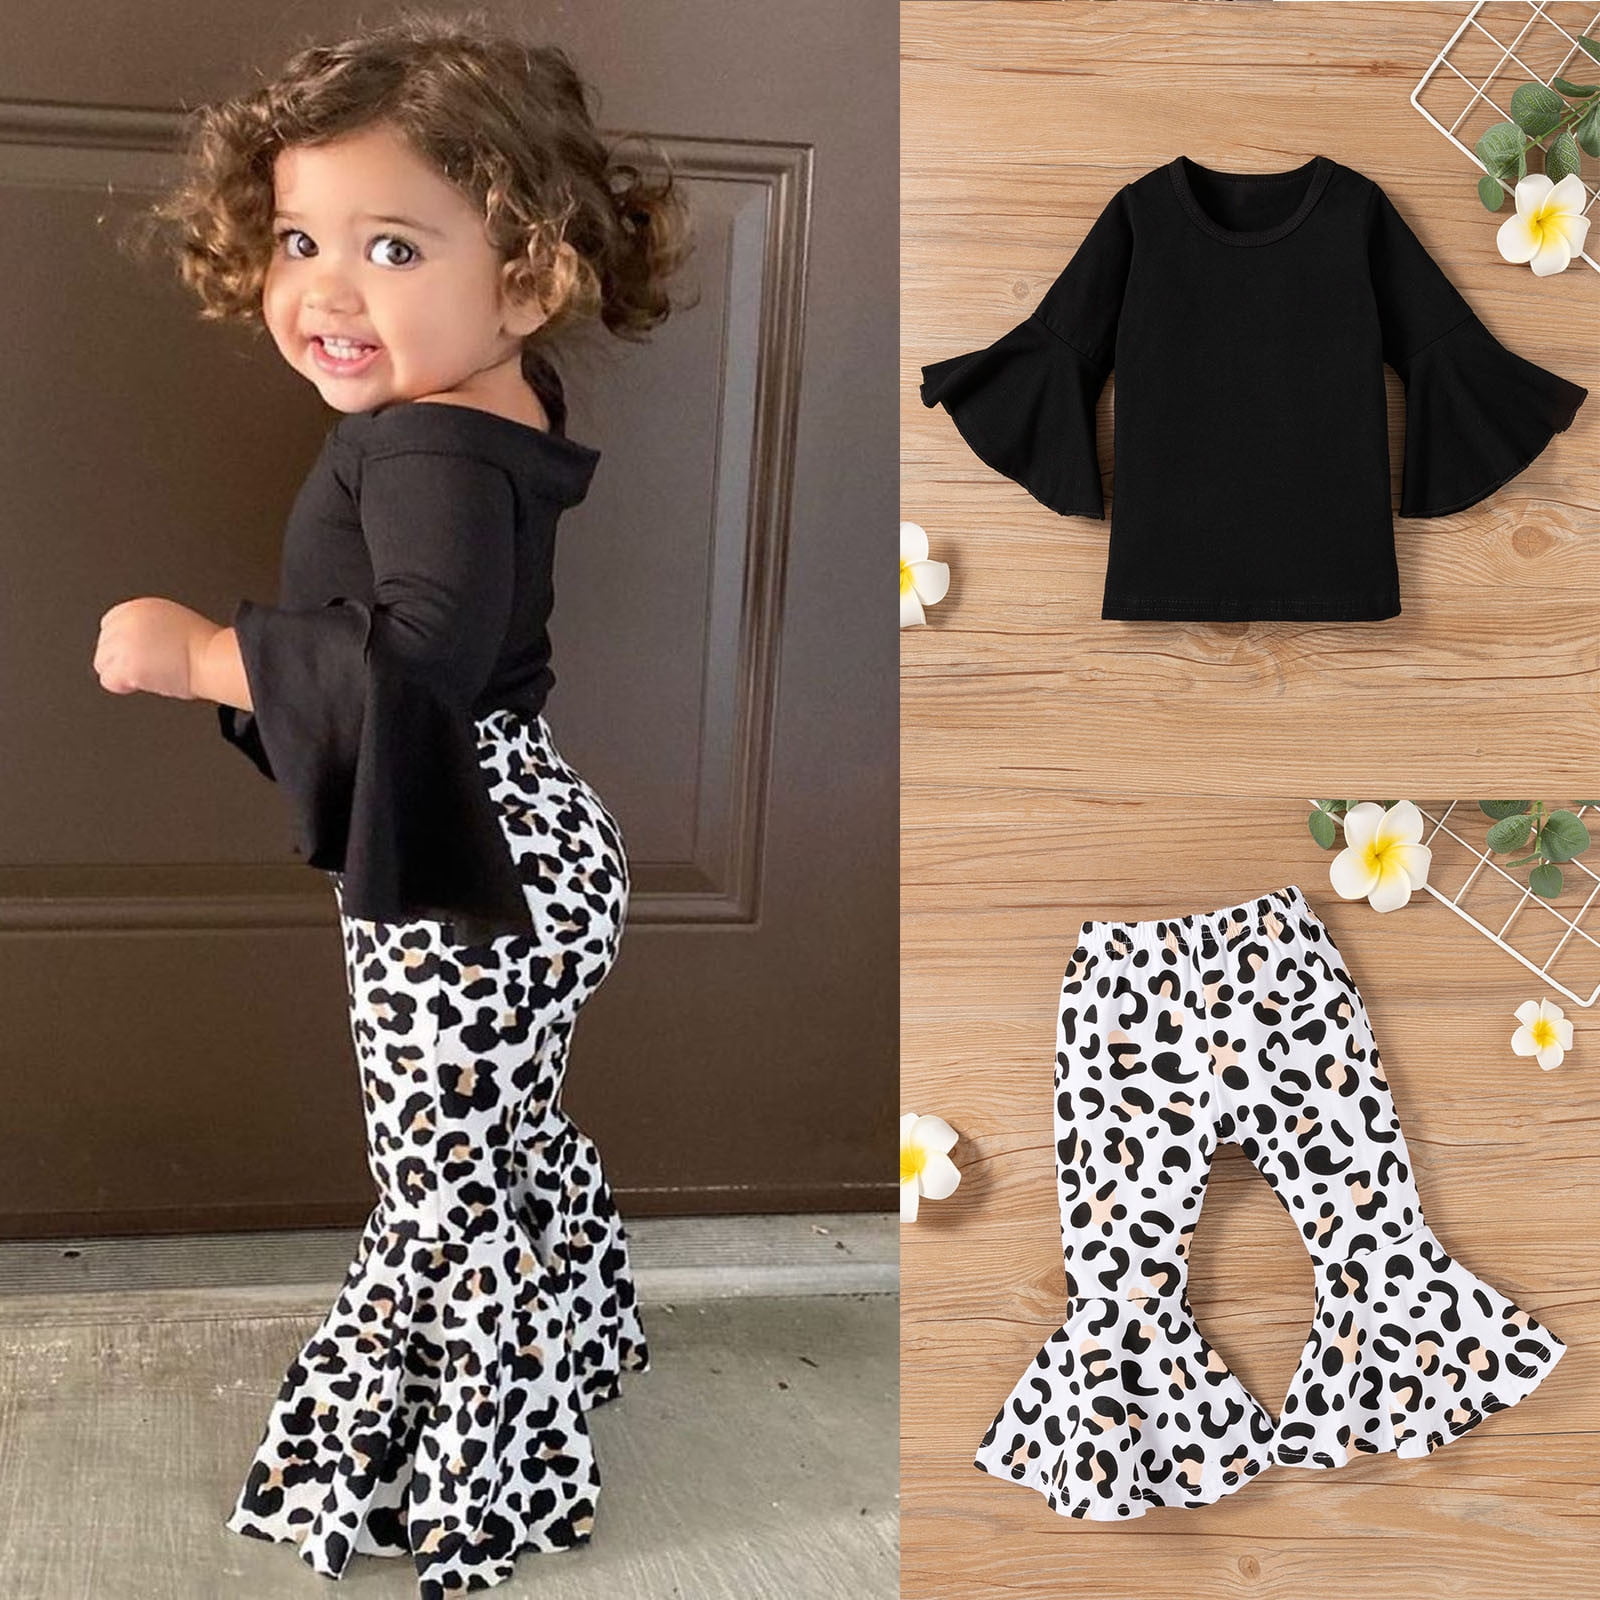 Buy Toddler Baby Girl Leopard Outfit Long Sleeve Ruffle T-Shirt Tops+Pants  Bottom Leggings Headband Clothes Set (A-Black, 1-2 Years) at